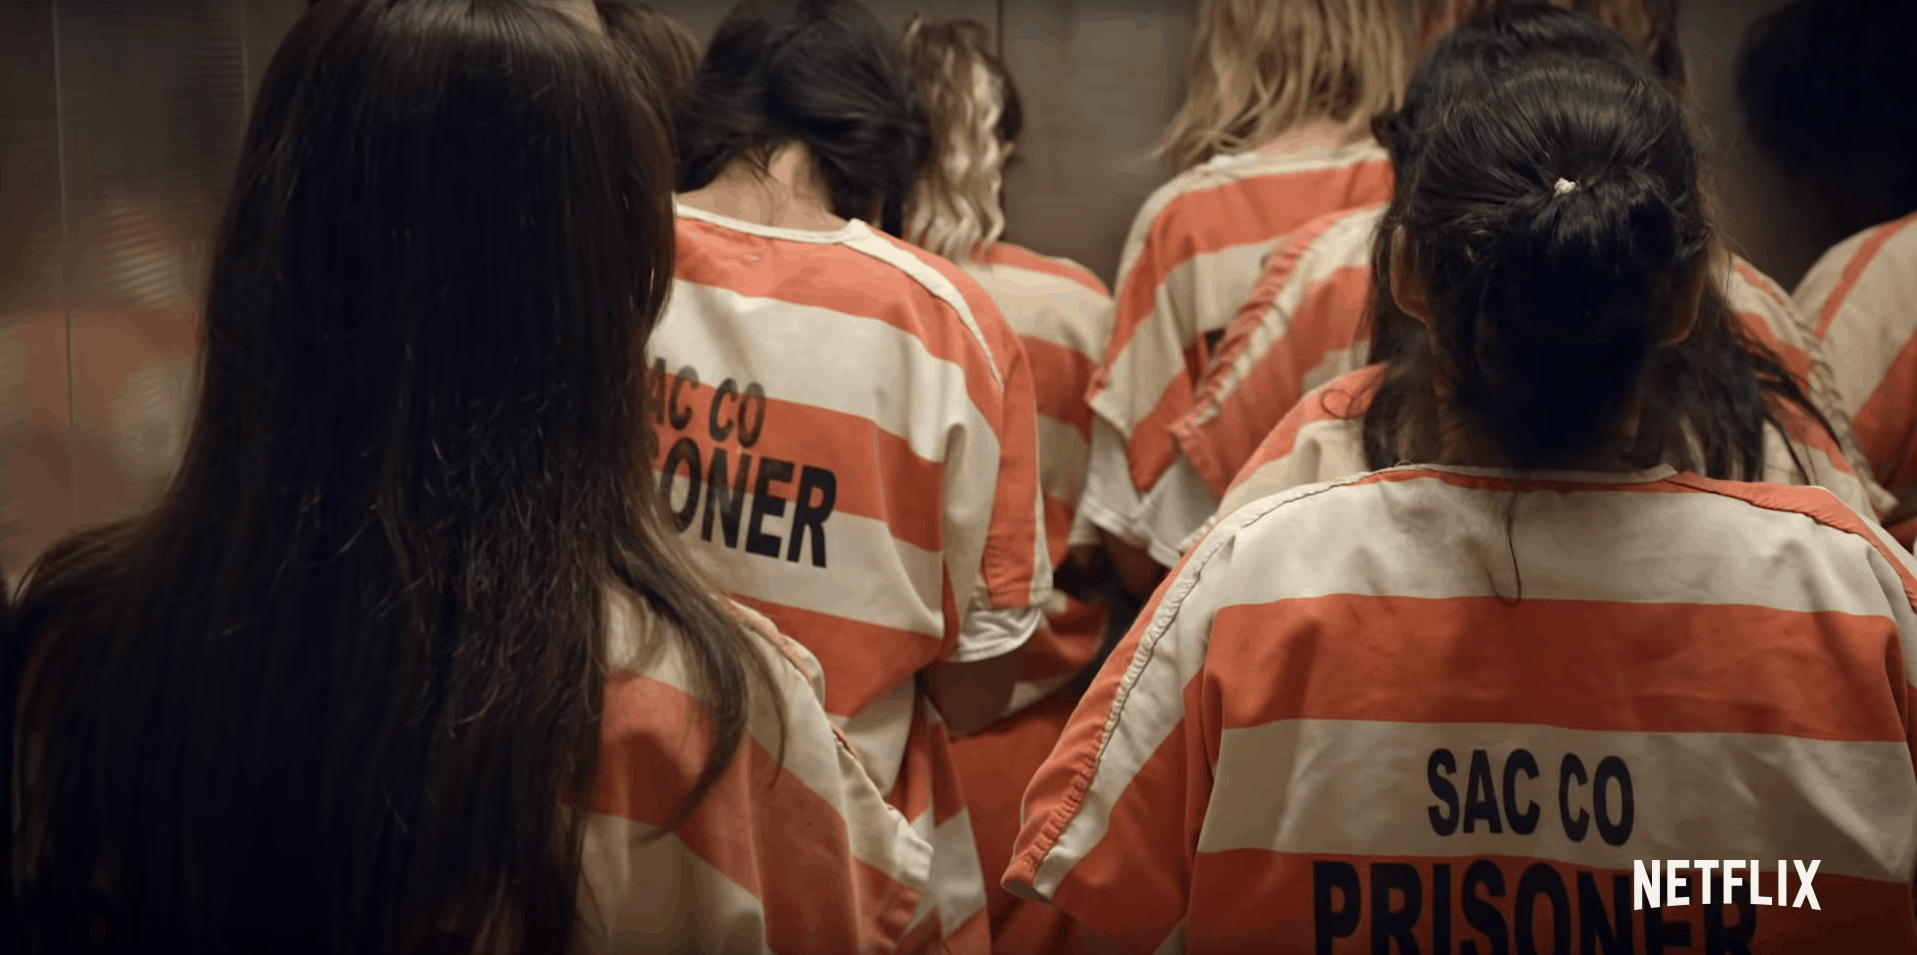 Reality TV goes to jail in upcoming Netflix show 1